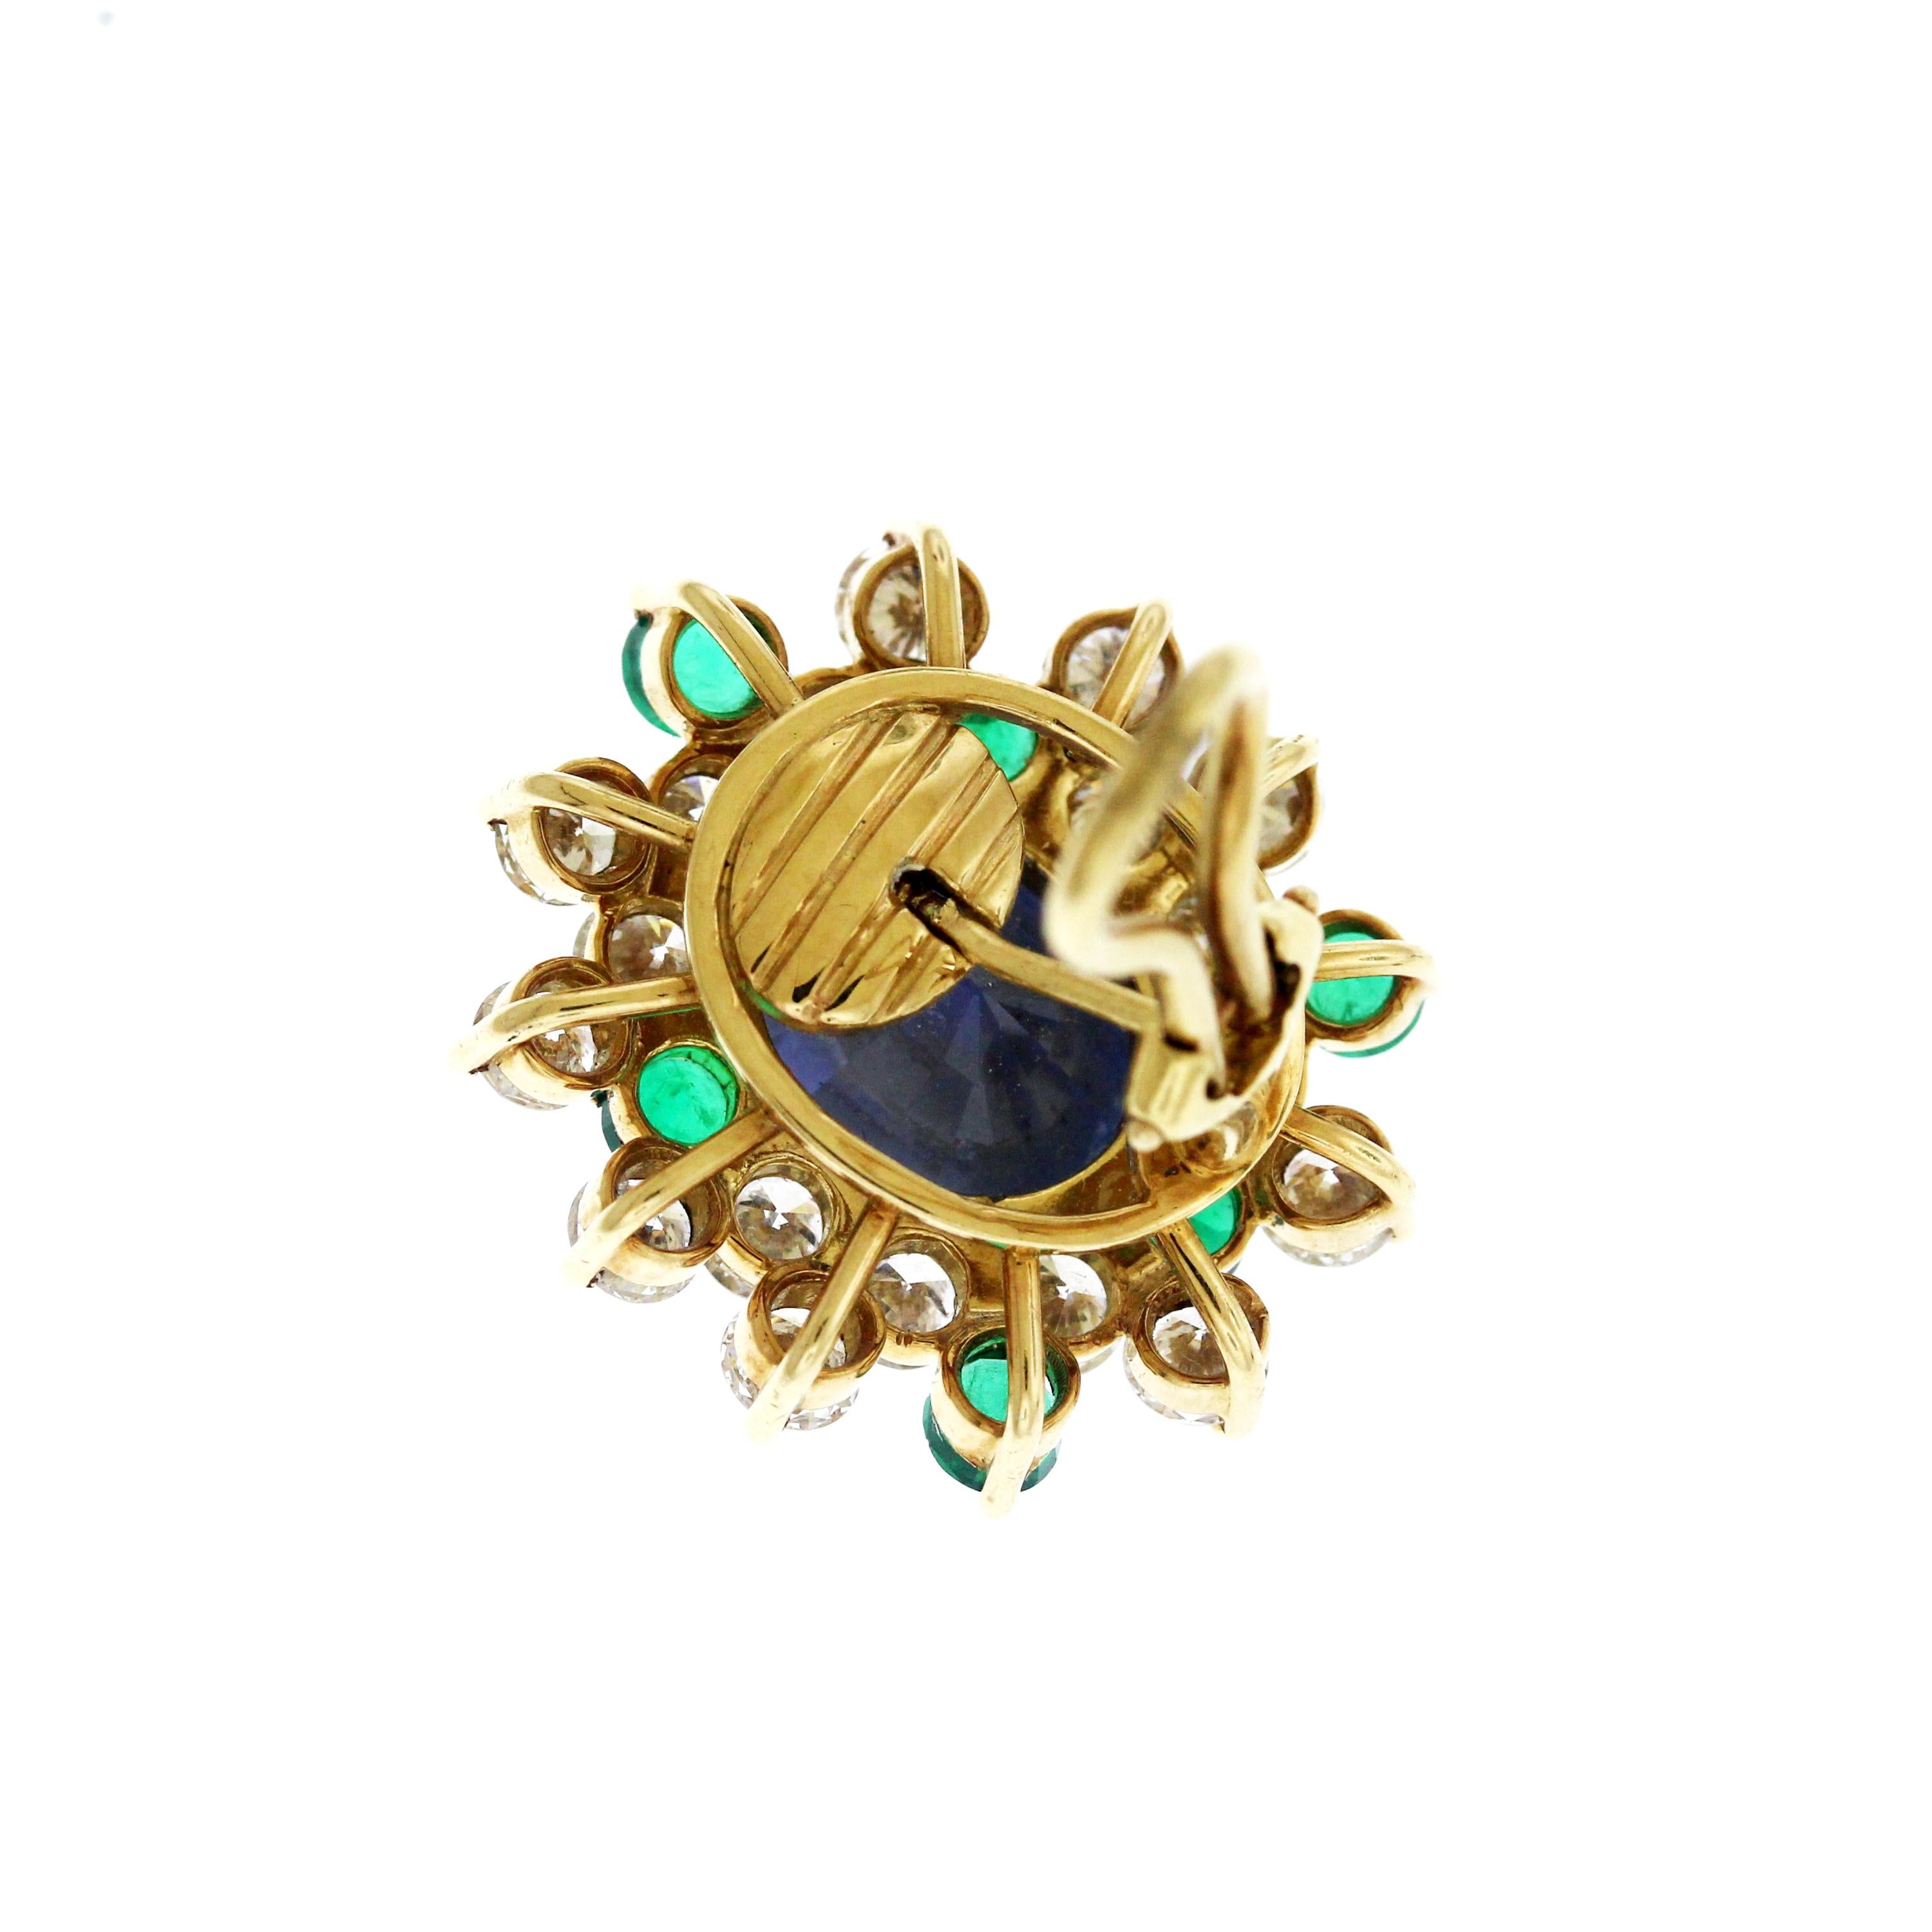 IF YOU ARE REALLY INTERESTED, CONTACT US WITH ANY REASONABLE OFFER. WE WILL TRY OUR BEST TO MAKE YOU HAPPY!

18K Yellow Gold and White Diamond Stud Earrings with Green and Oval Cut Blue Sapphires

12 carat approximate blue and green sapphires, total